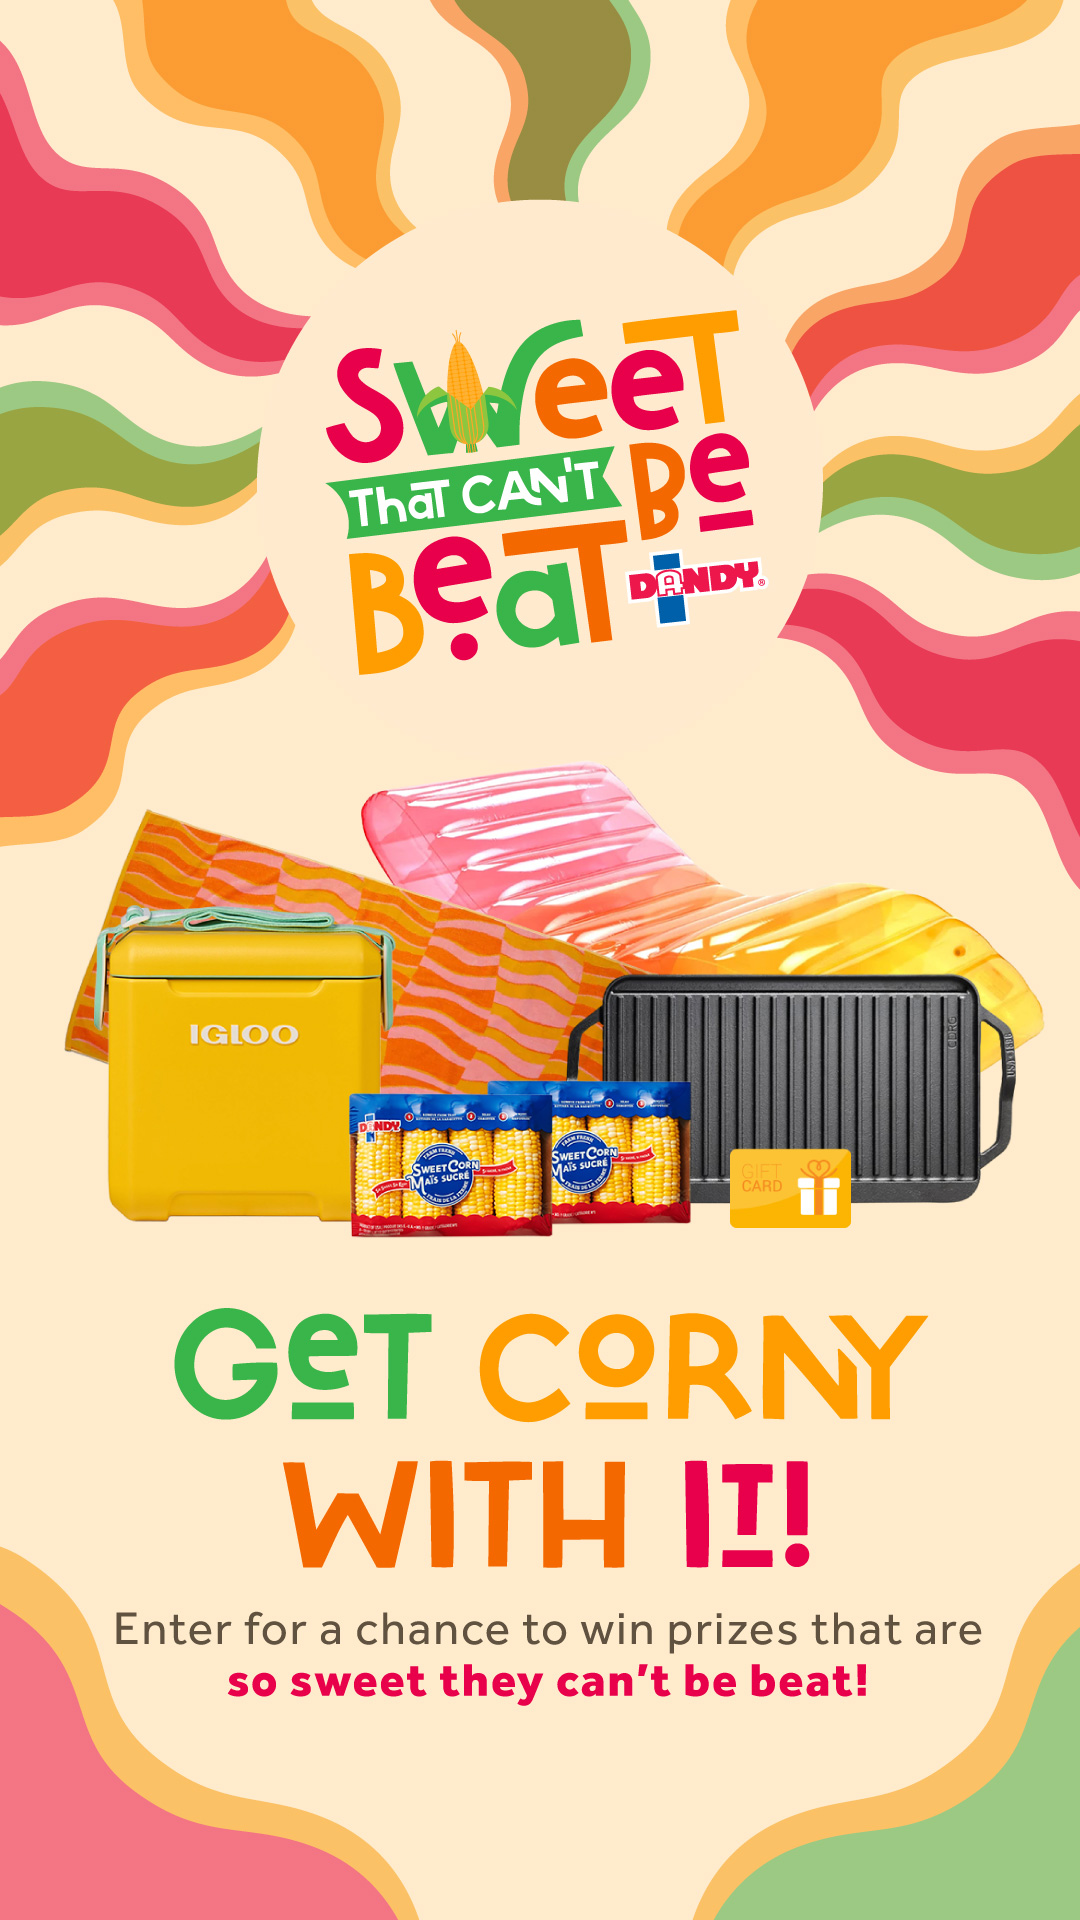 DANDY® CELERY LAUNCHES “SWEET THAT CAN’T BE BEAT” SWEEPSTAKES